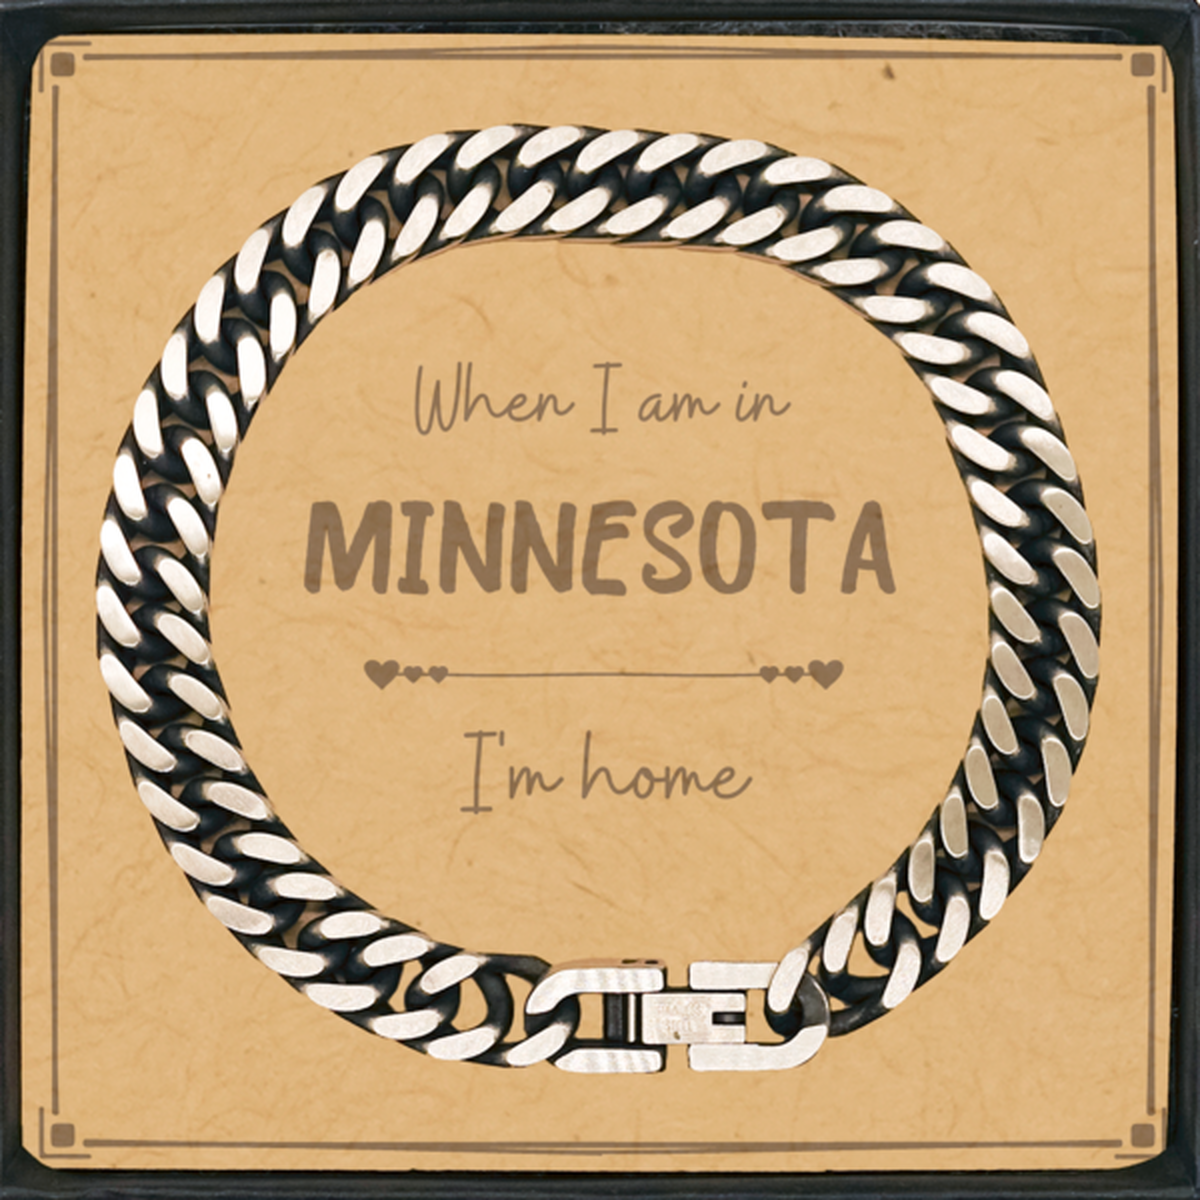 When I am in Minnesota I'm home Cuban Link Chain Bracelet, Message Card Gifts For Minnesota, State Minnesota Birthday Gifts for Friends Coworker